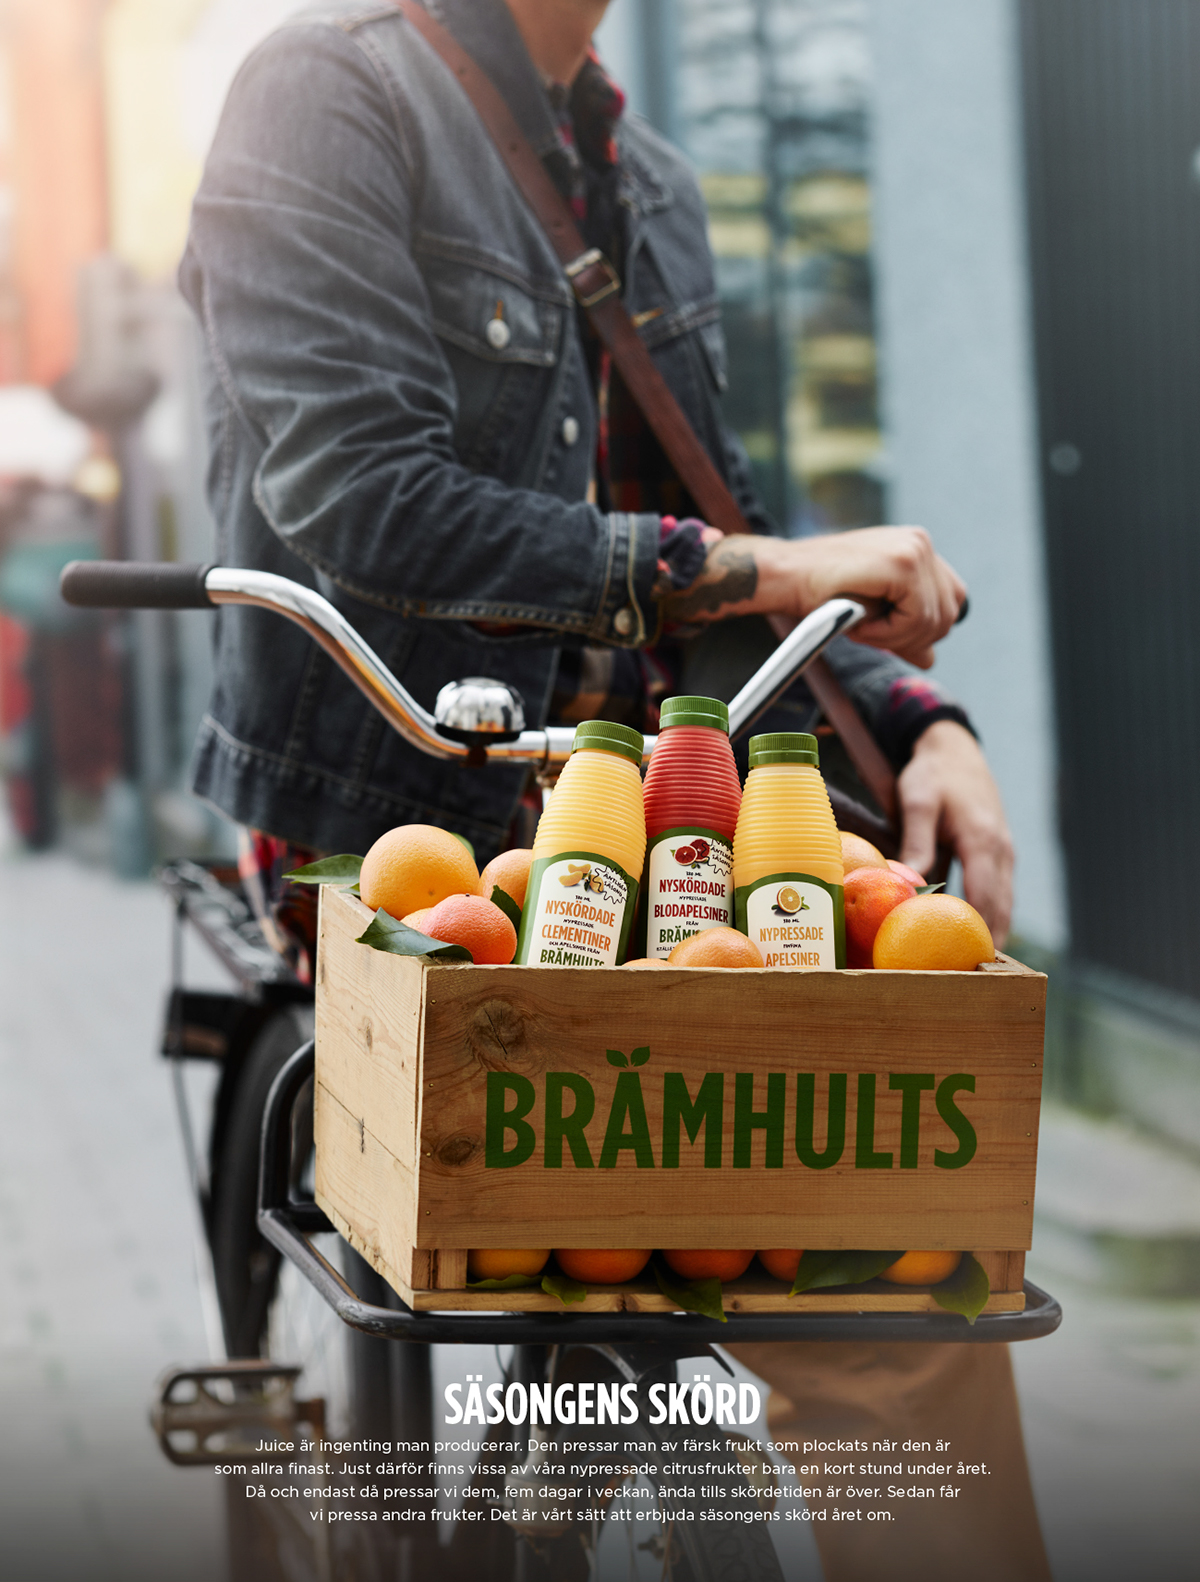 Campaign for Brämhults by Bulldozer. Art director Andreas Österlund.